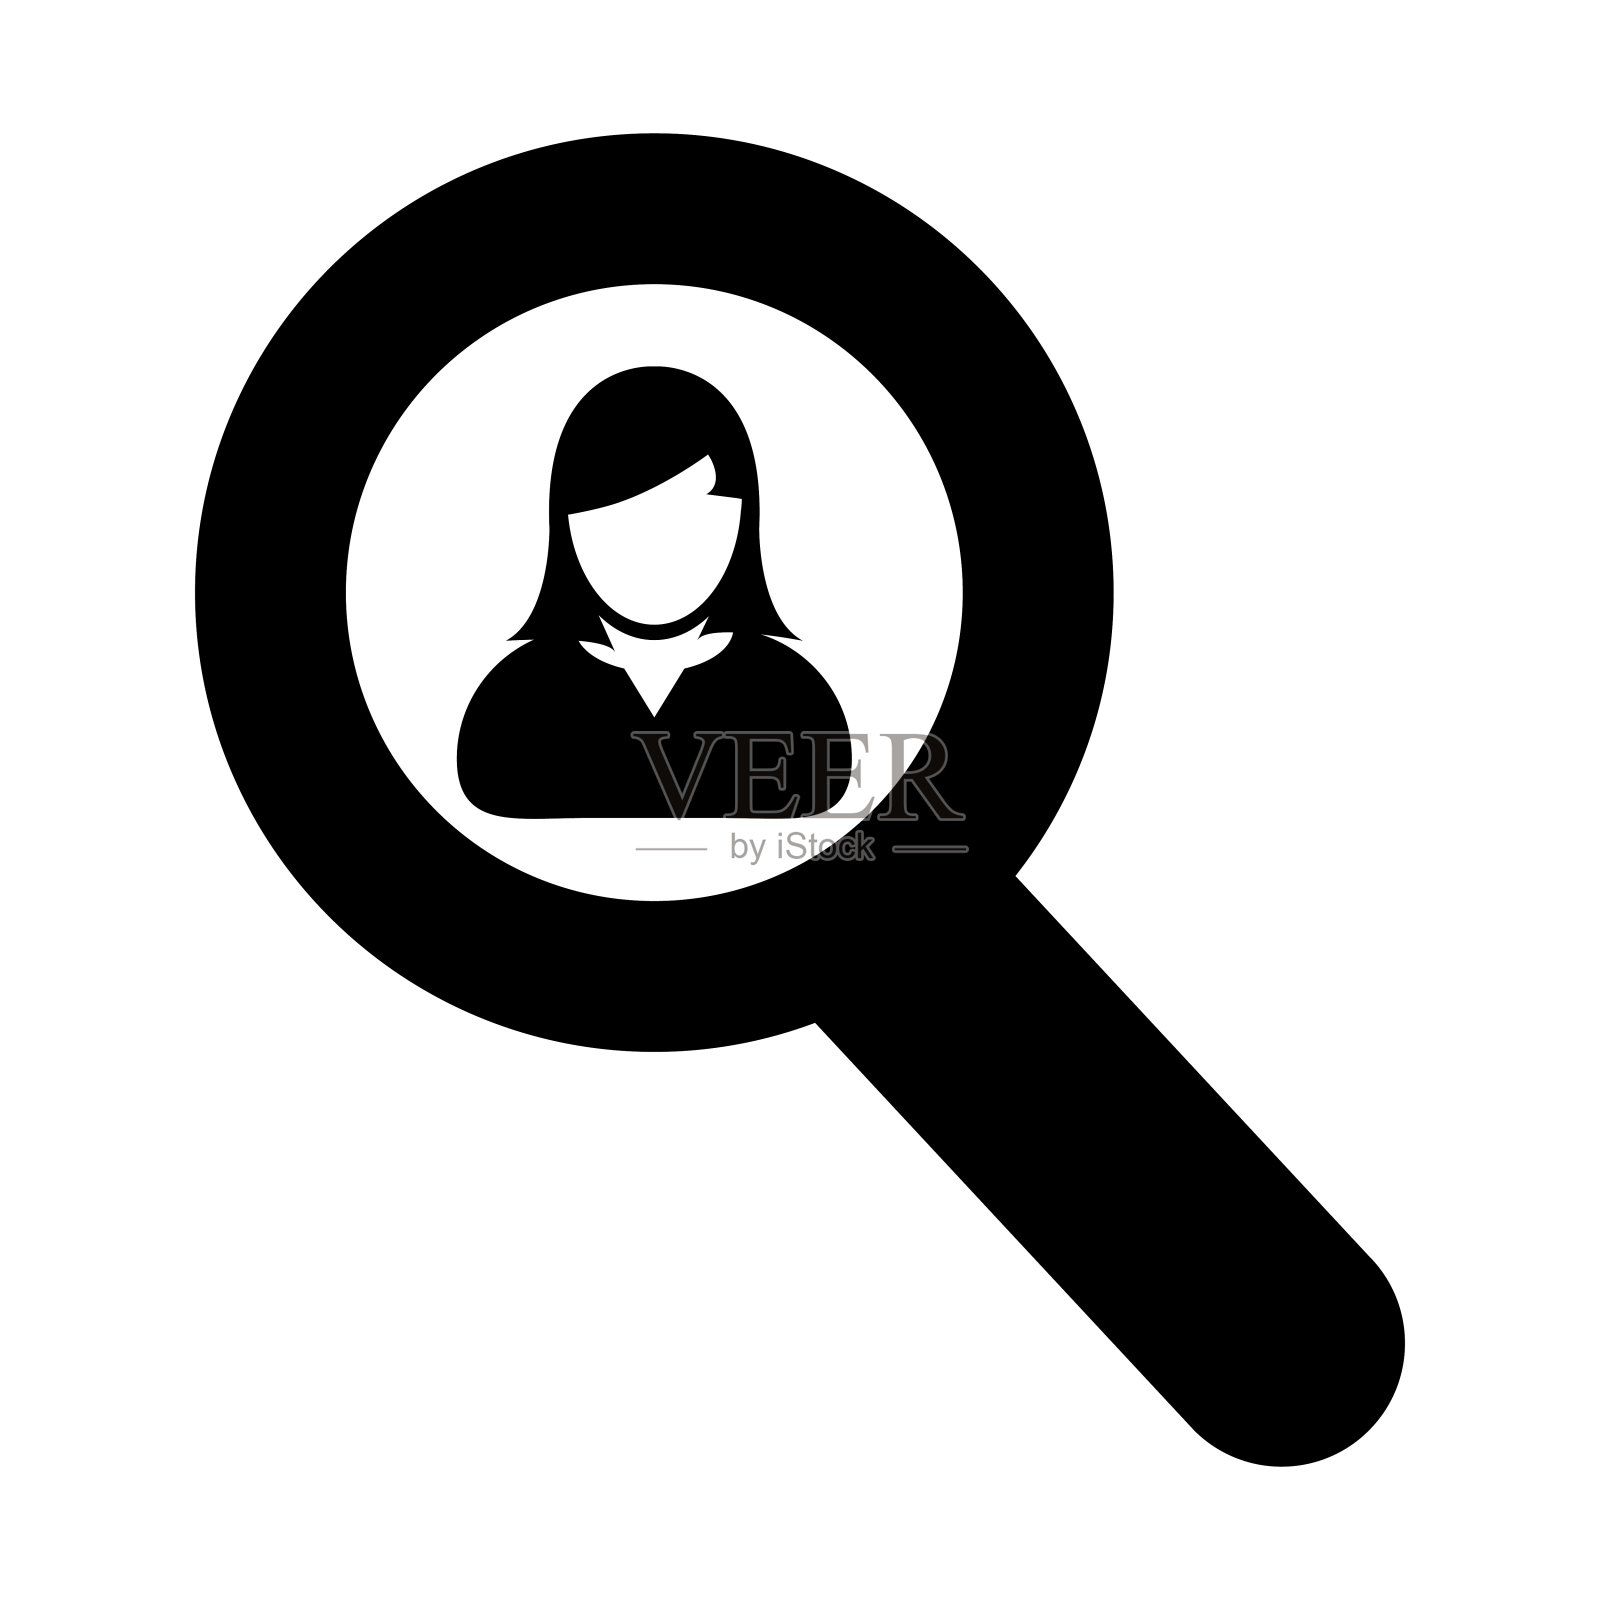 Search Icon - Person Vector Symbol for Female User Profile Avatar With Magnifying Glass for find in字形象形图插图设计元素图片